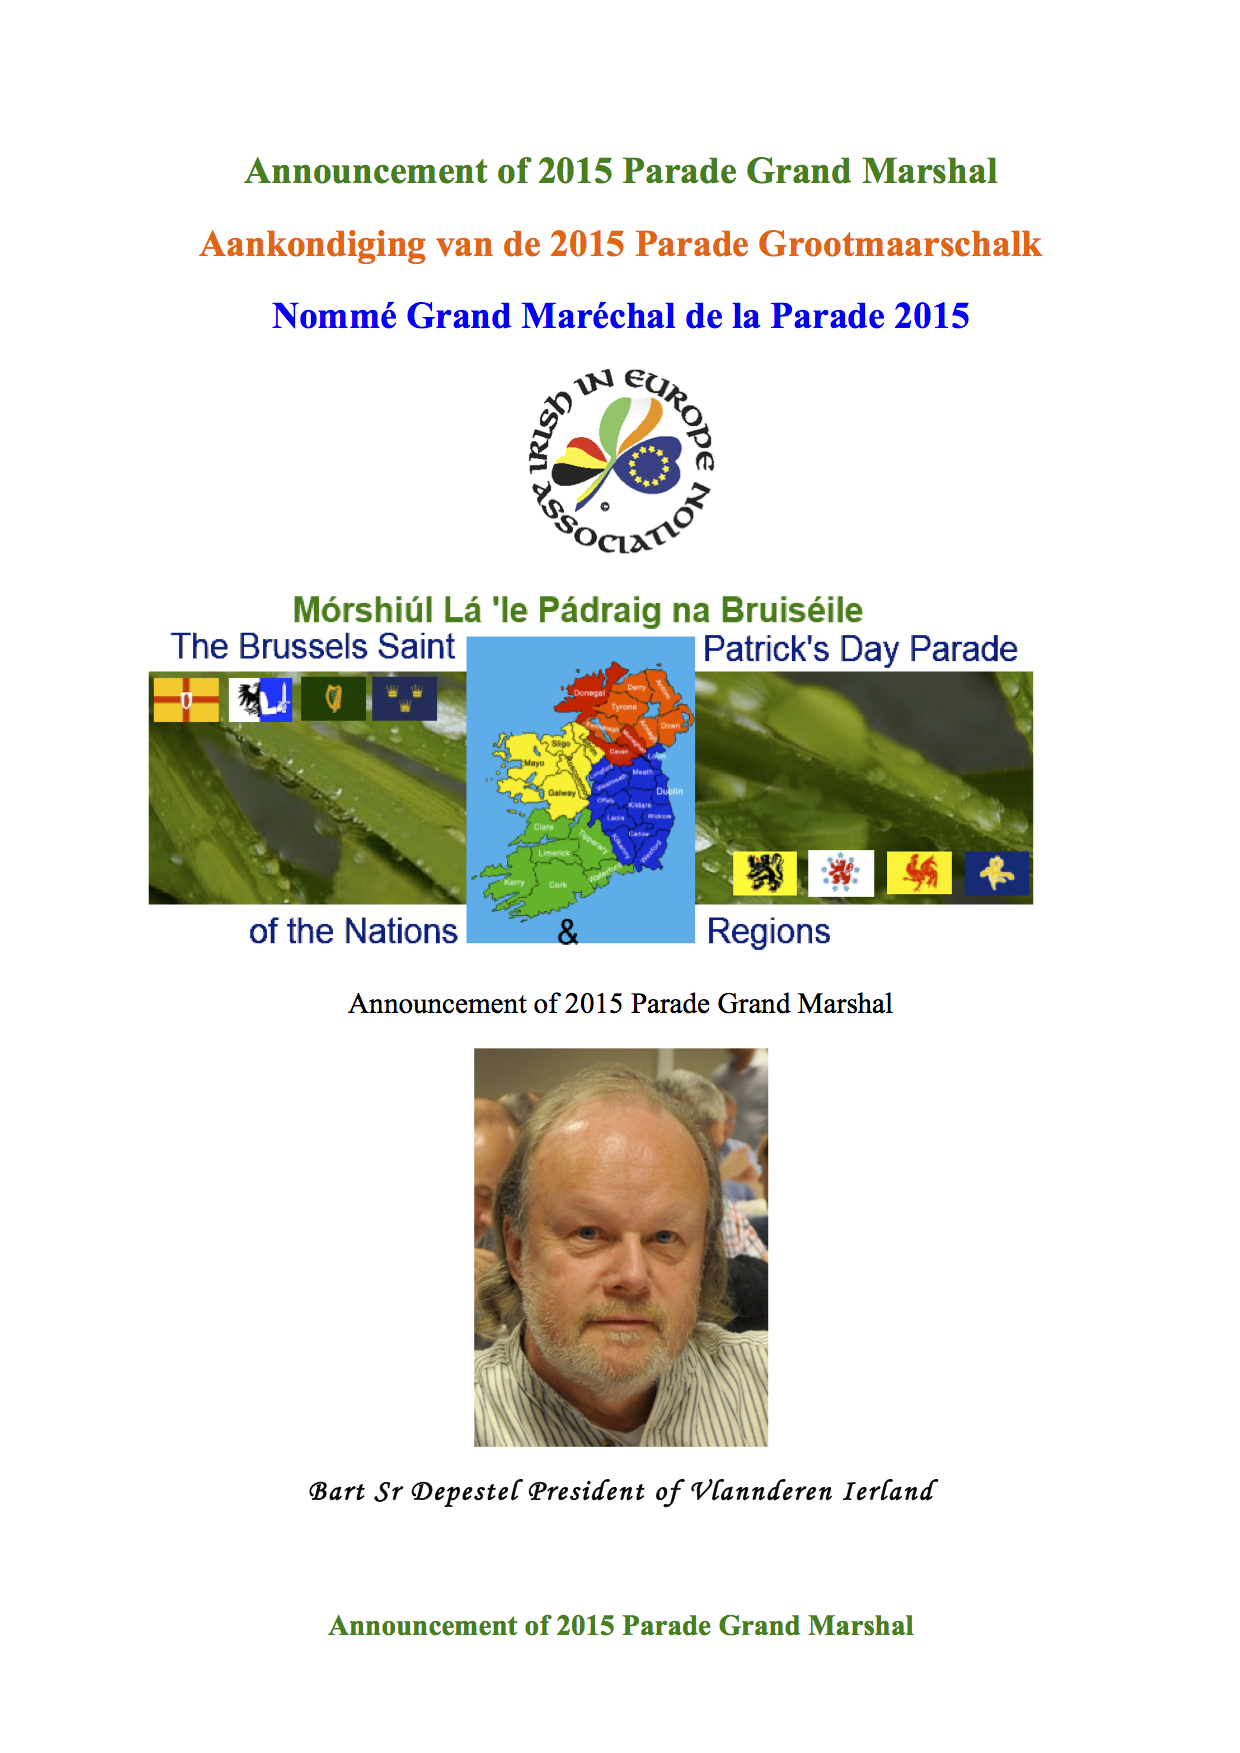 Announcement of Parade Grand Marshal Eng_Nl_Fr